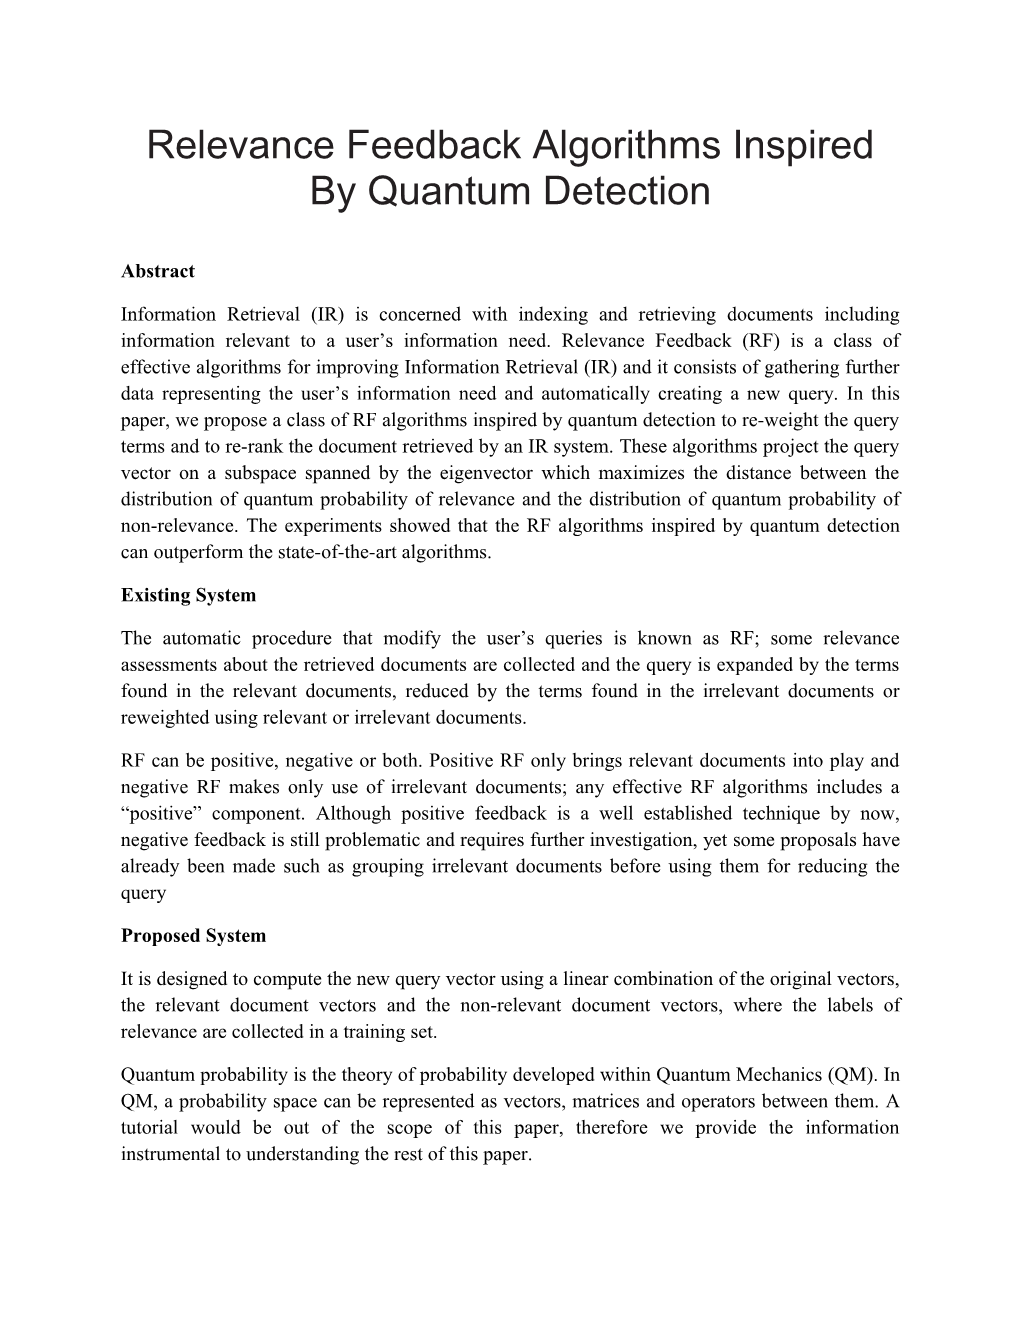 Relevance Feedback Algorithms Inspired by Quantum Detection